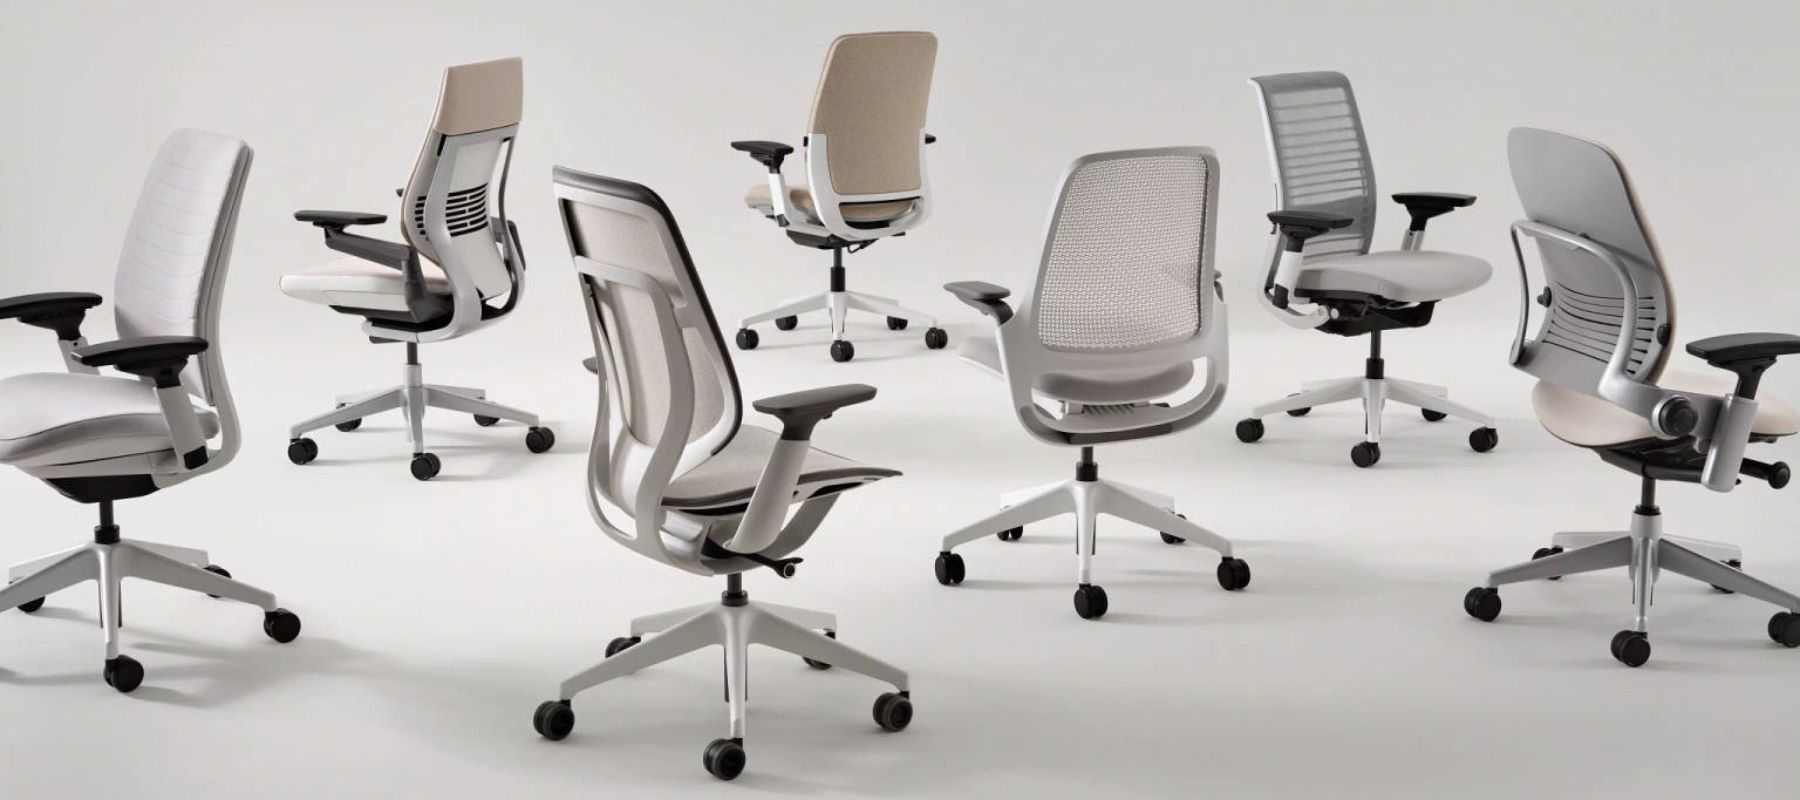 Steelcase task seating with carbon neutral product certification